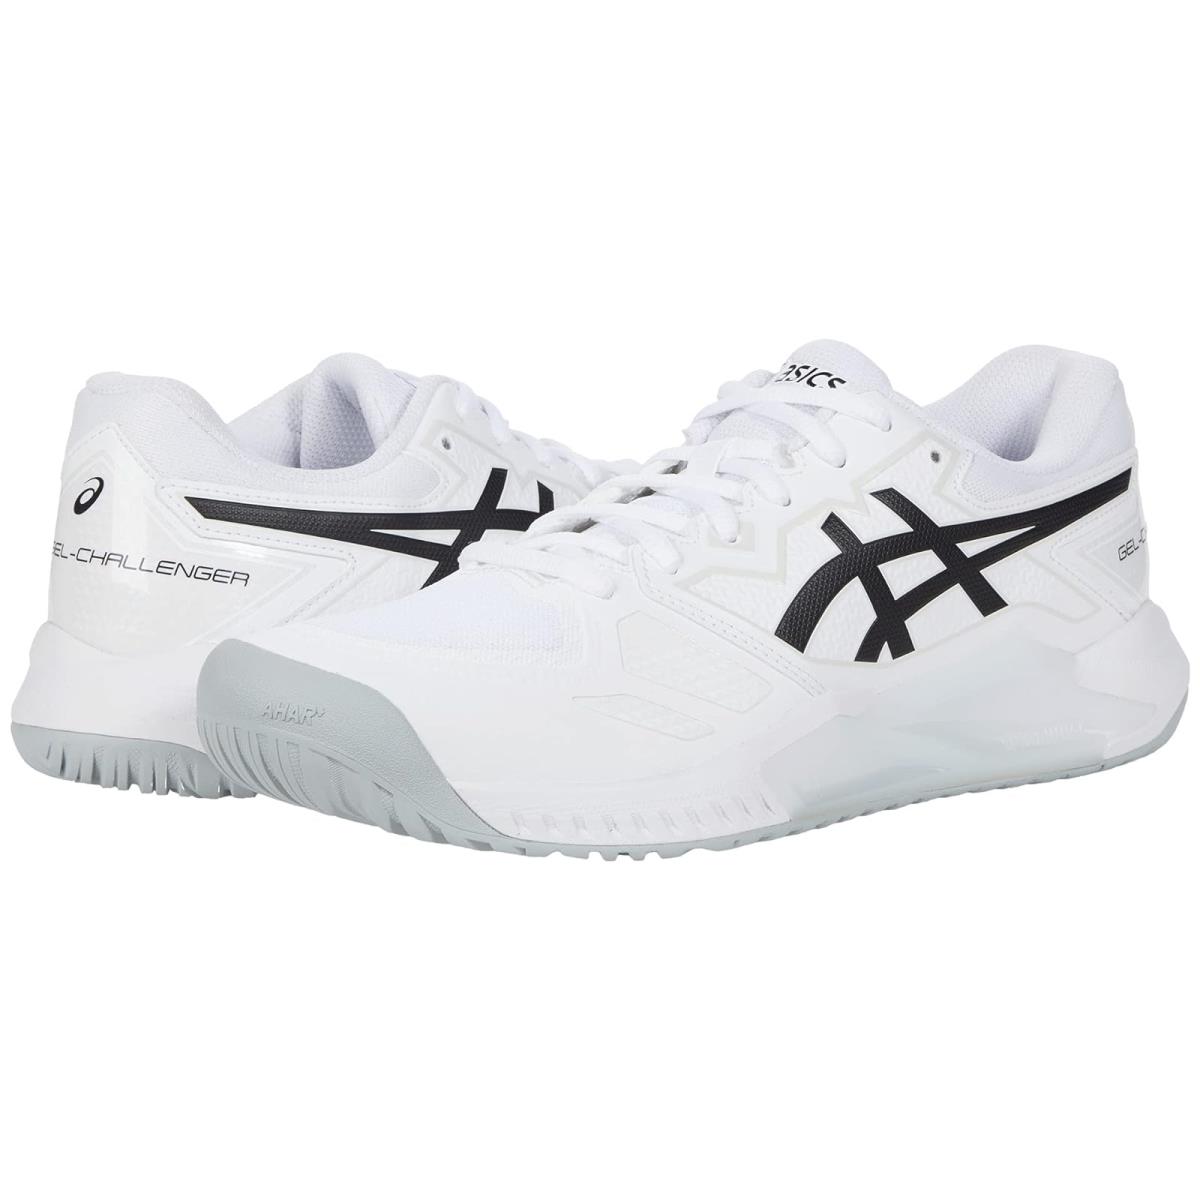 Man`s Sneakers Athletic Shoes Asics Gel-challenger 13 White/Black